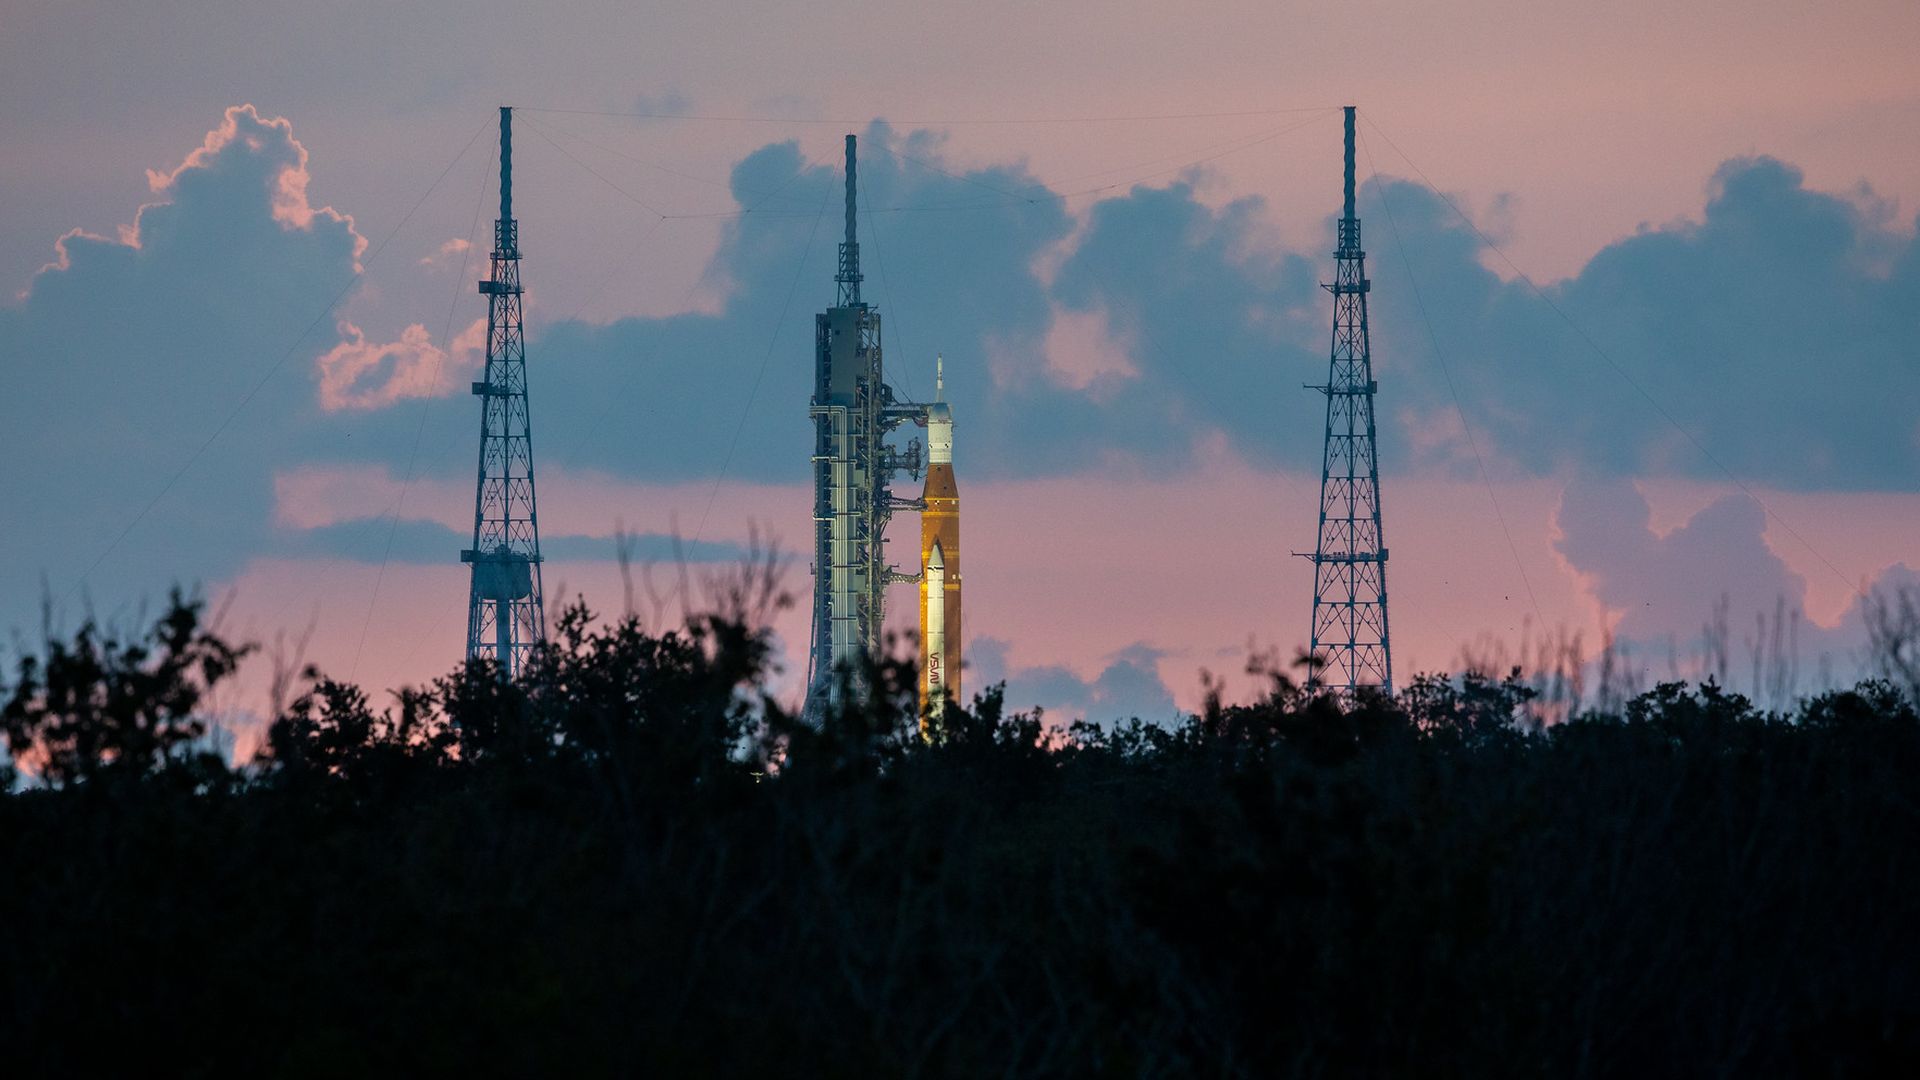 The space launch system rocket standing on the pad against a pink sky